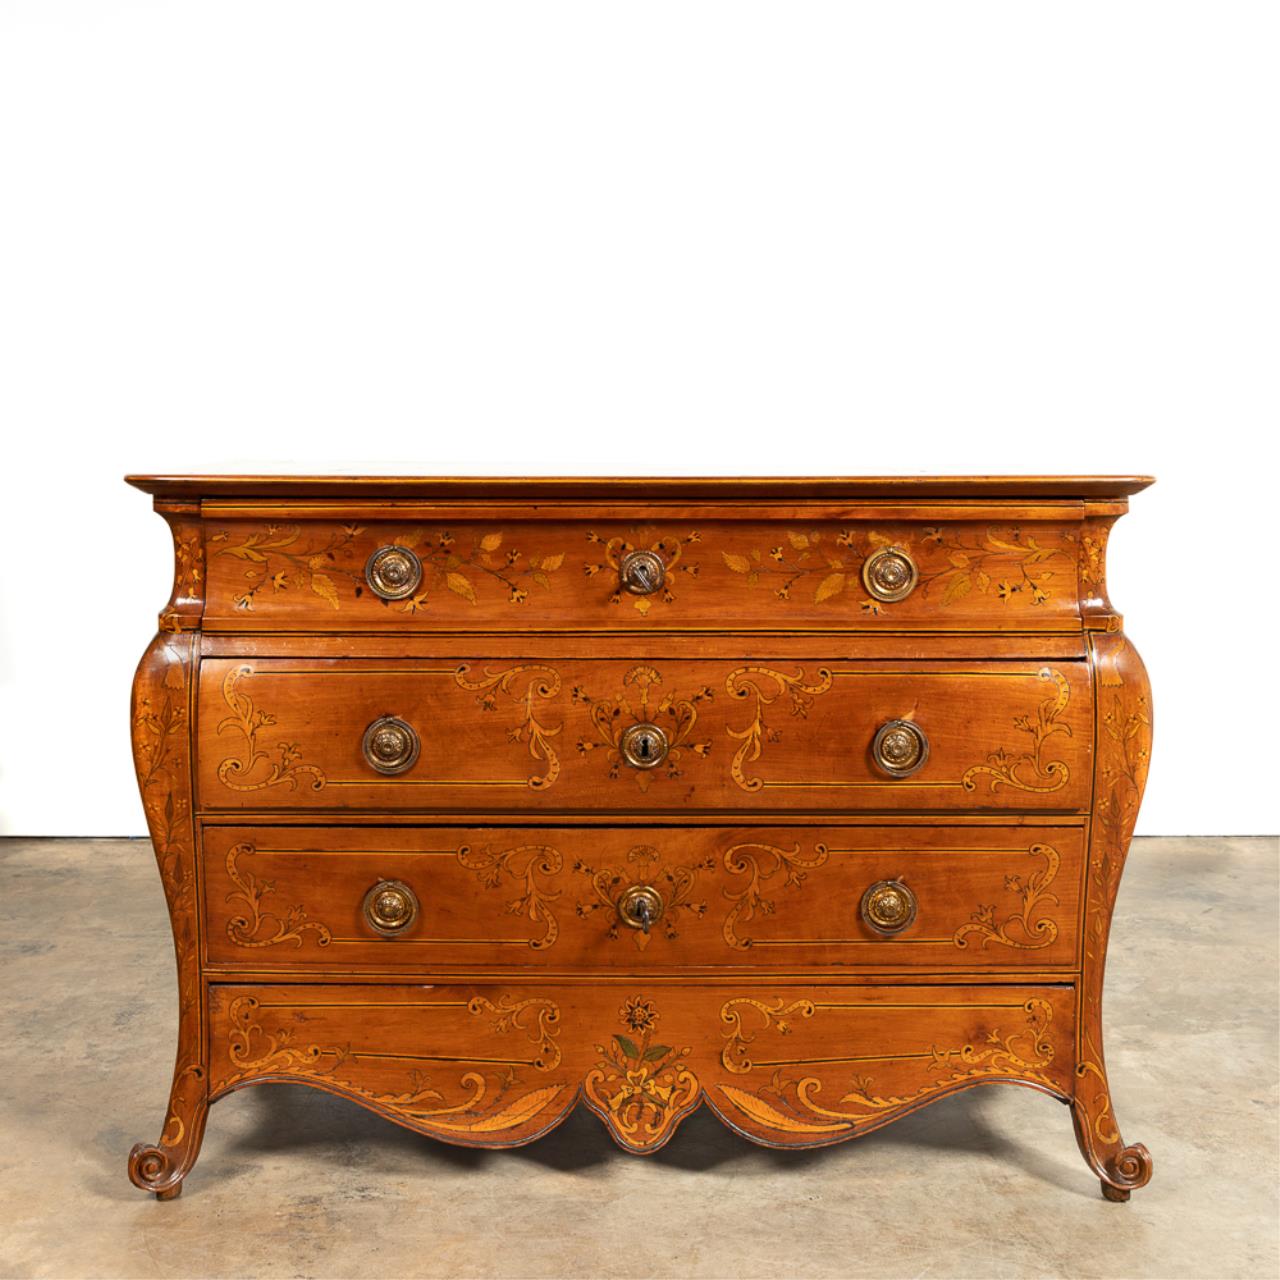 FRENCH FLORAL MARQUETRY BOMBE COMMODE 35a46c